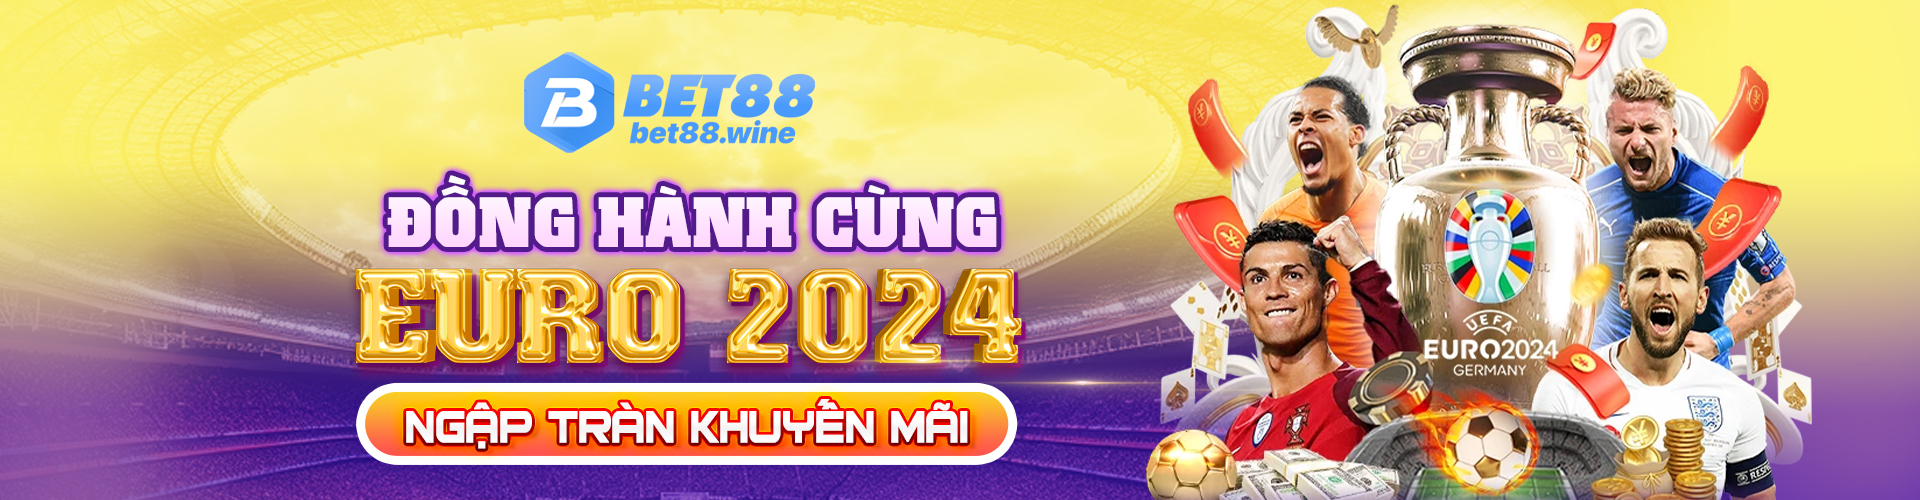 bet88-wine-dong-hanh-cung-euro-2024